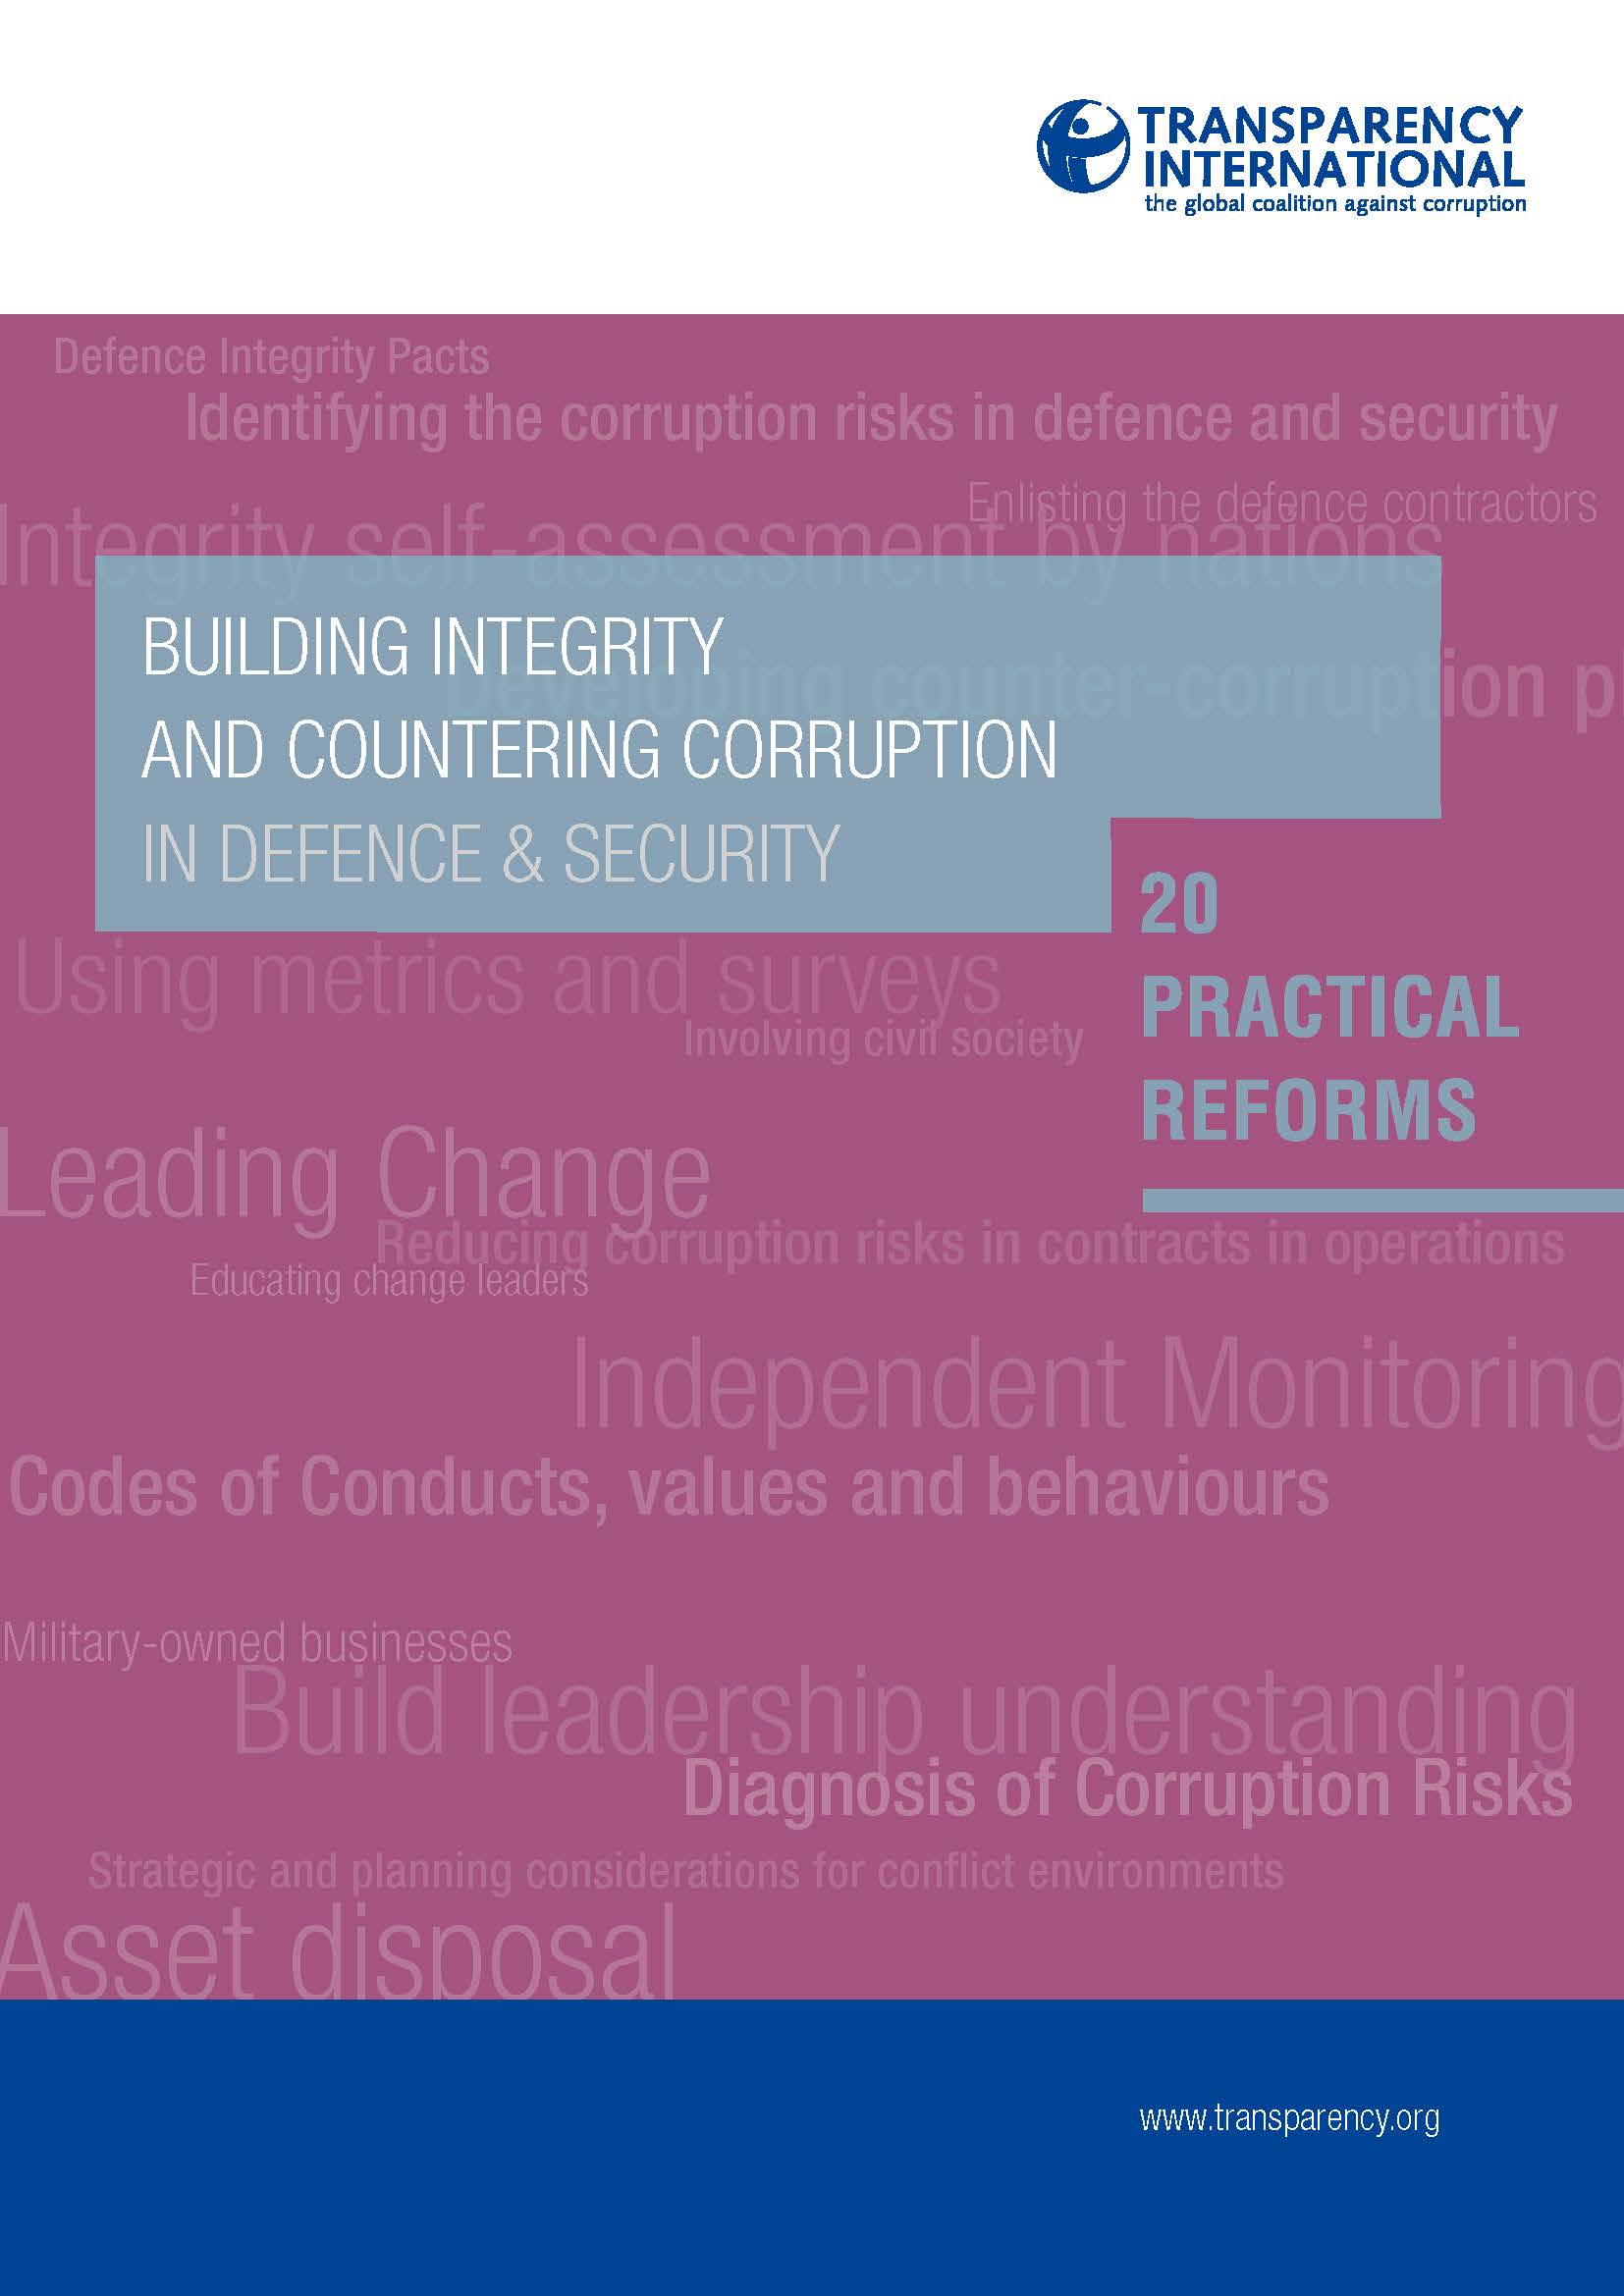 Pages from TI_Integrity Corruption_Defense Security_2011.jpg